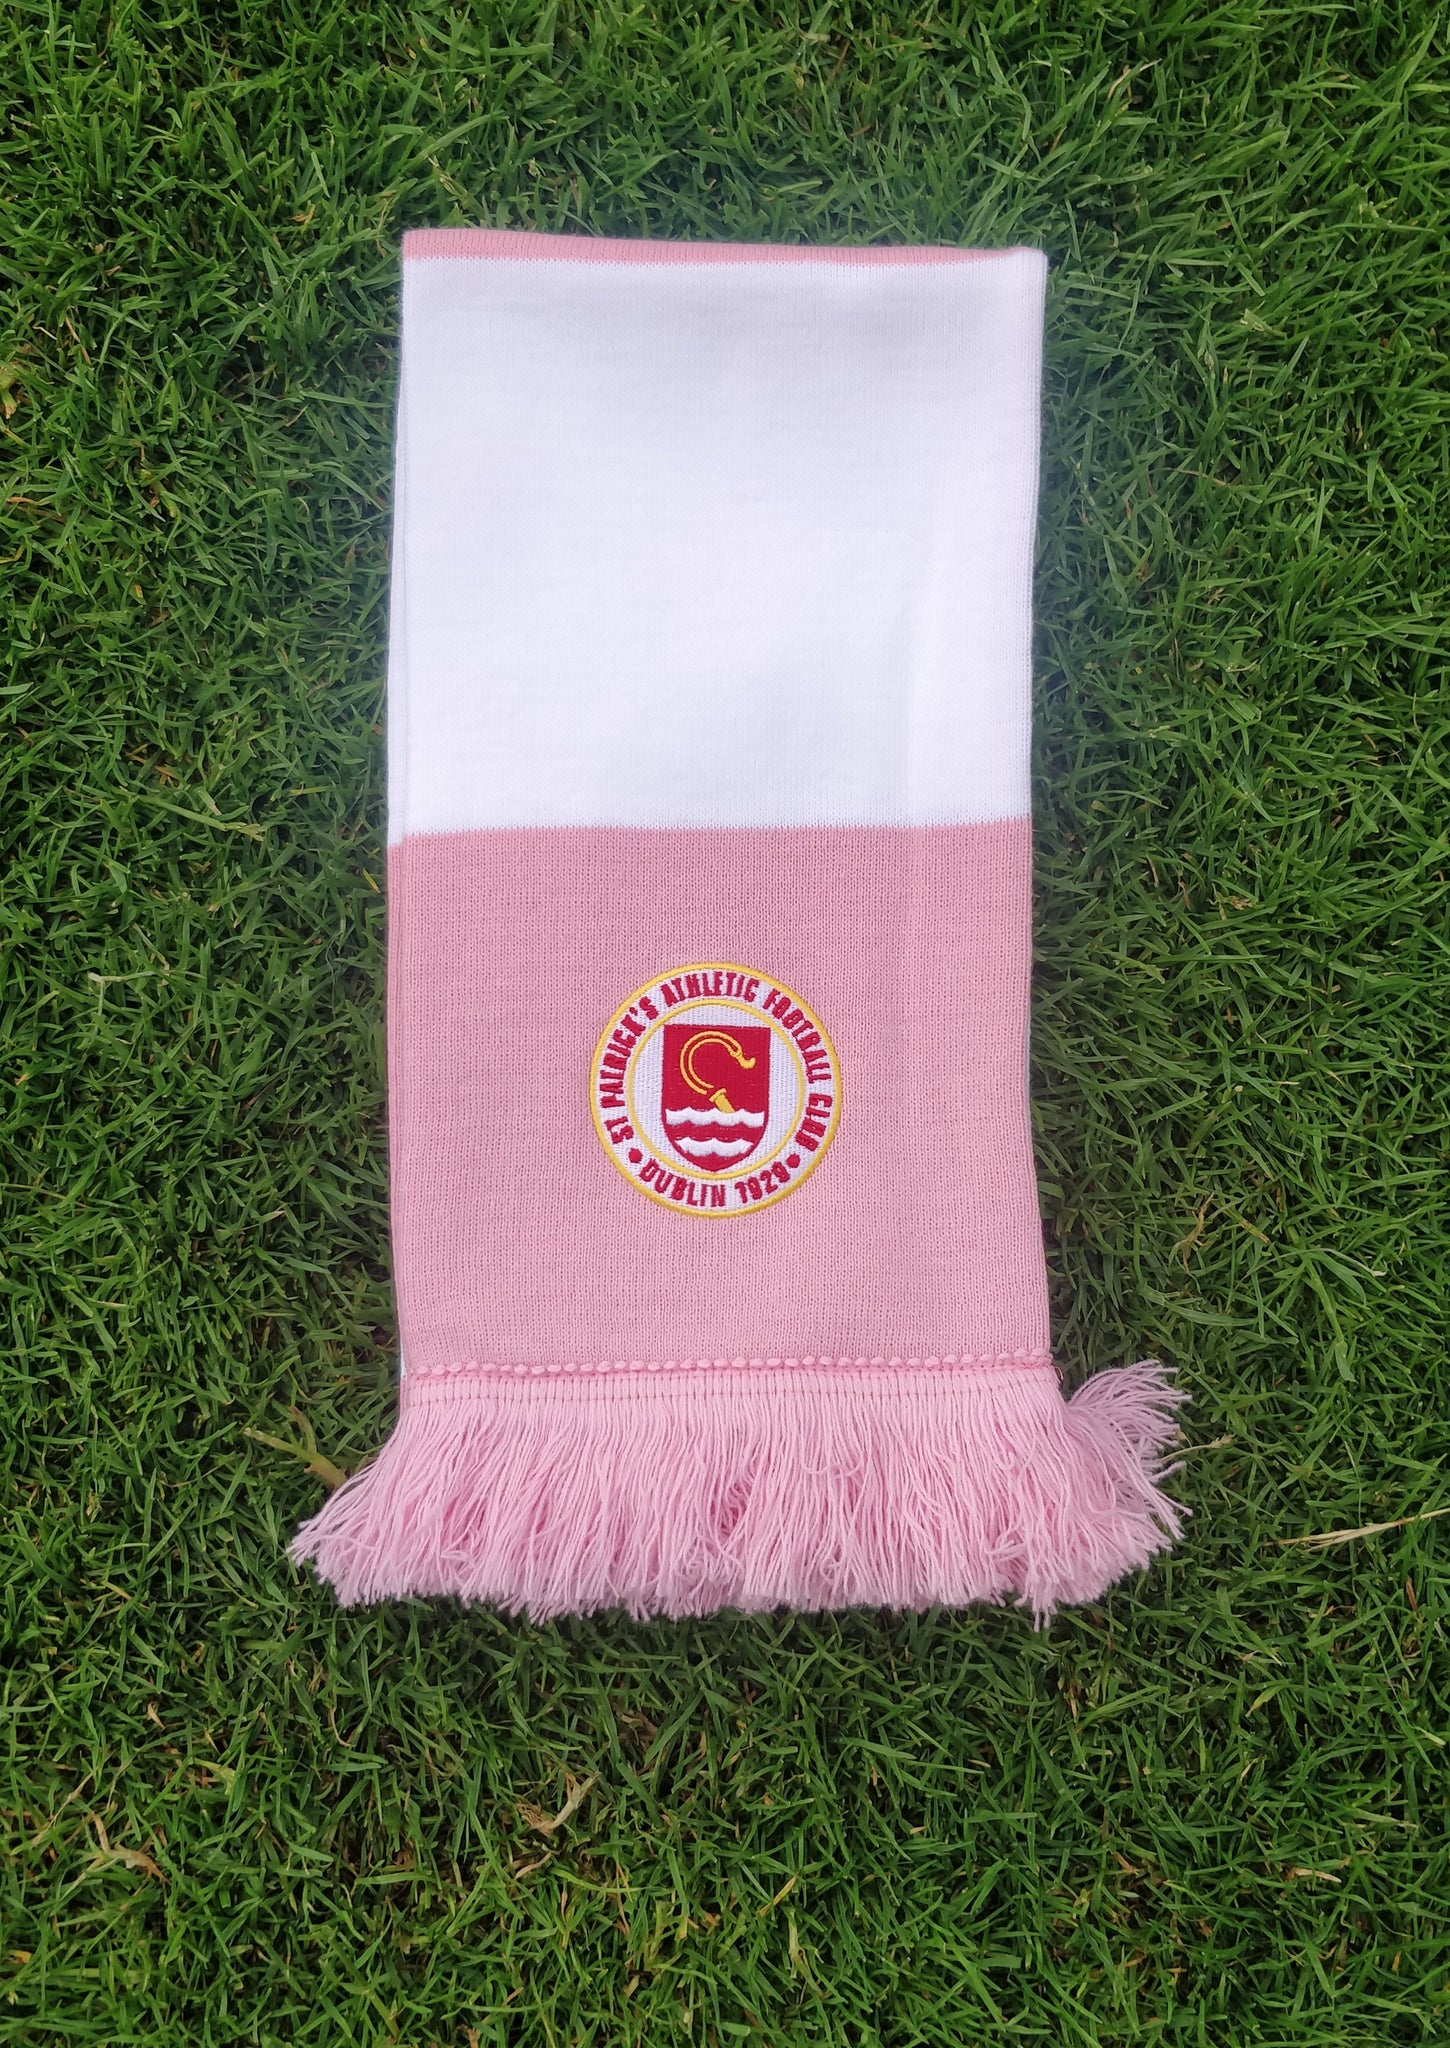 Pink and White Barscarf with Embroidered Crest